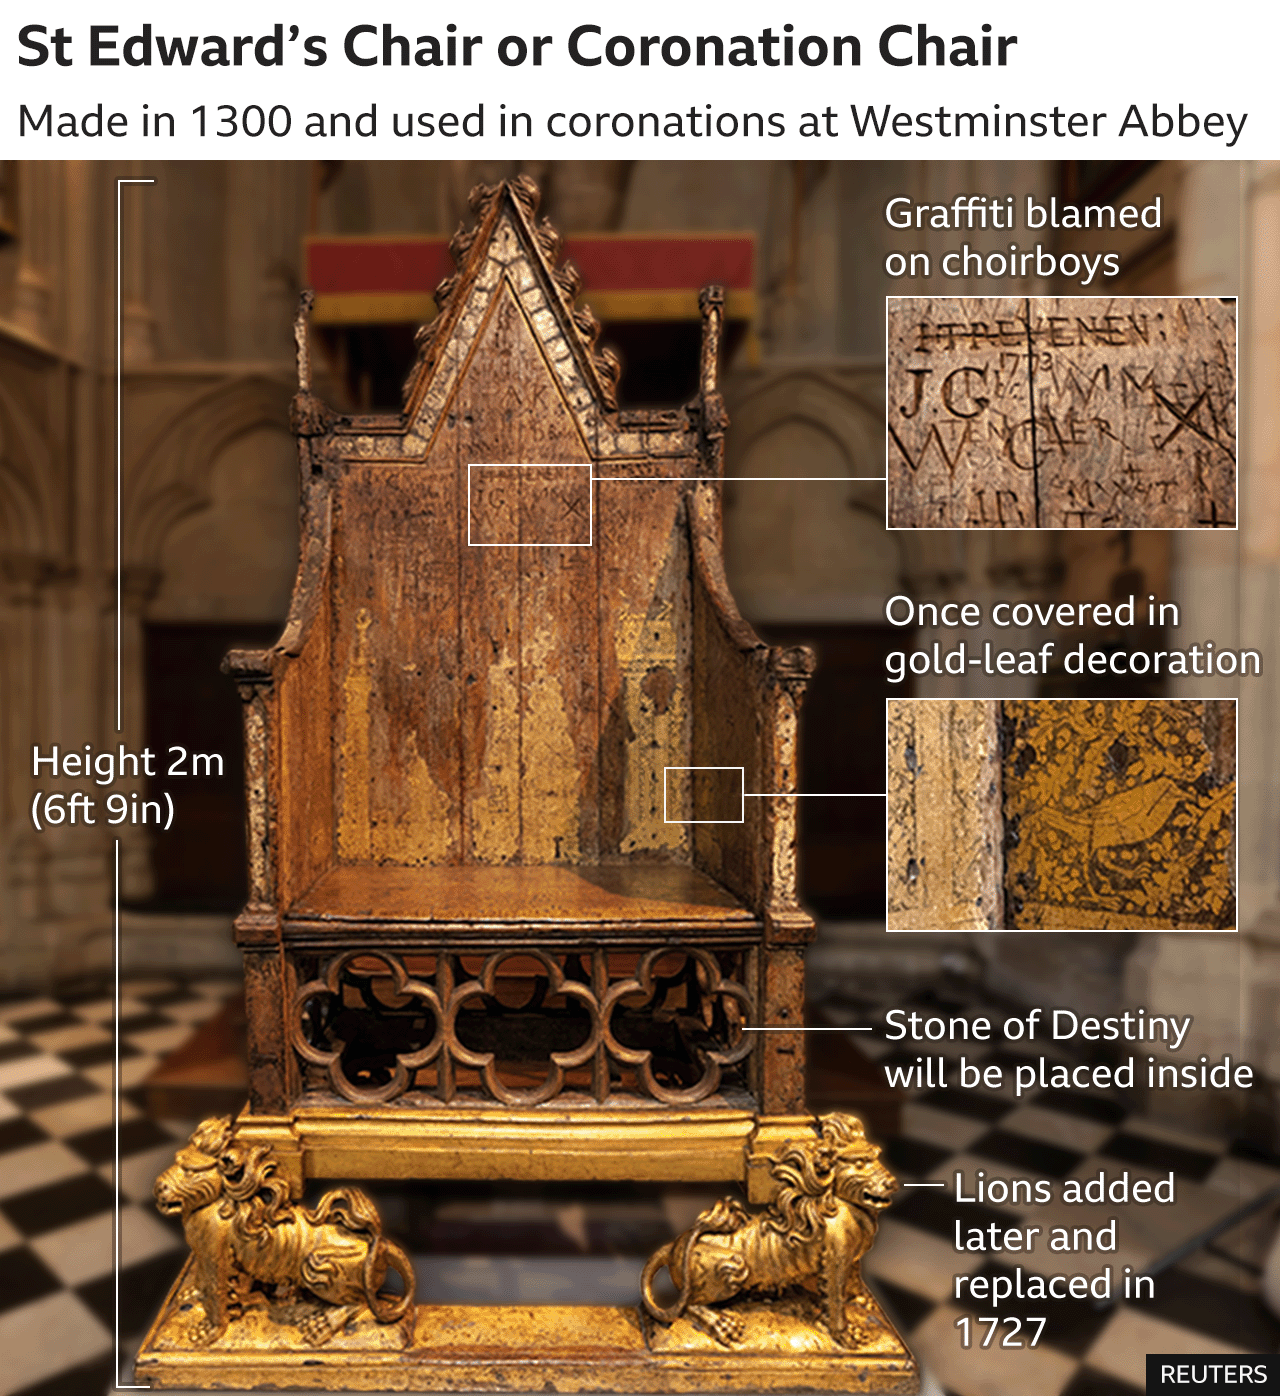 Graphic of the Coronation Chair highlighting the carved graffiti blamed on choirboys and some of the remaining gold-leaf decoration. It also shows where the Stone of Destiny will be placed under the seat.